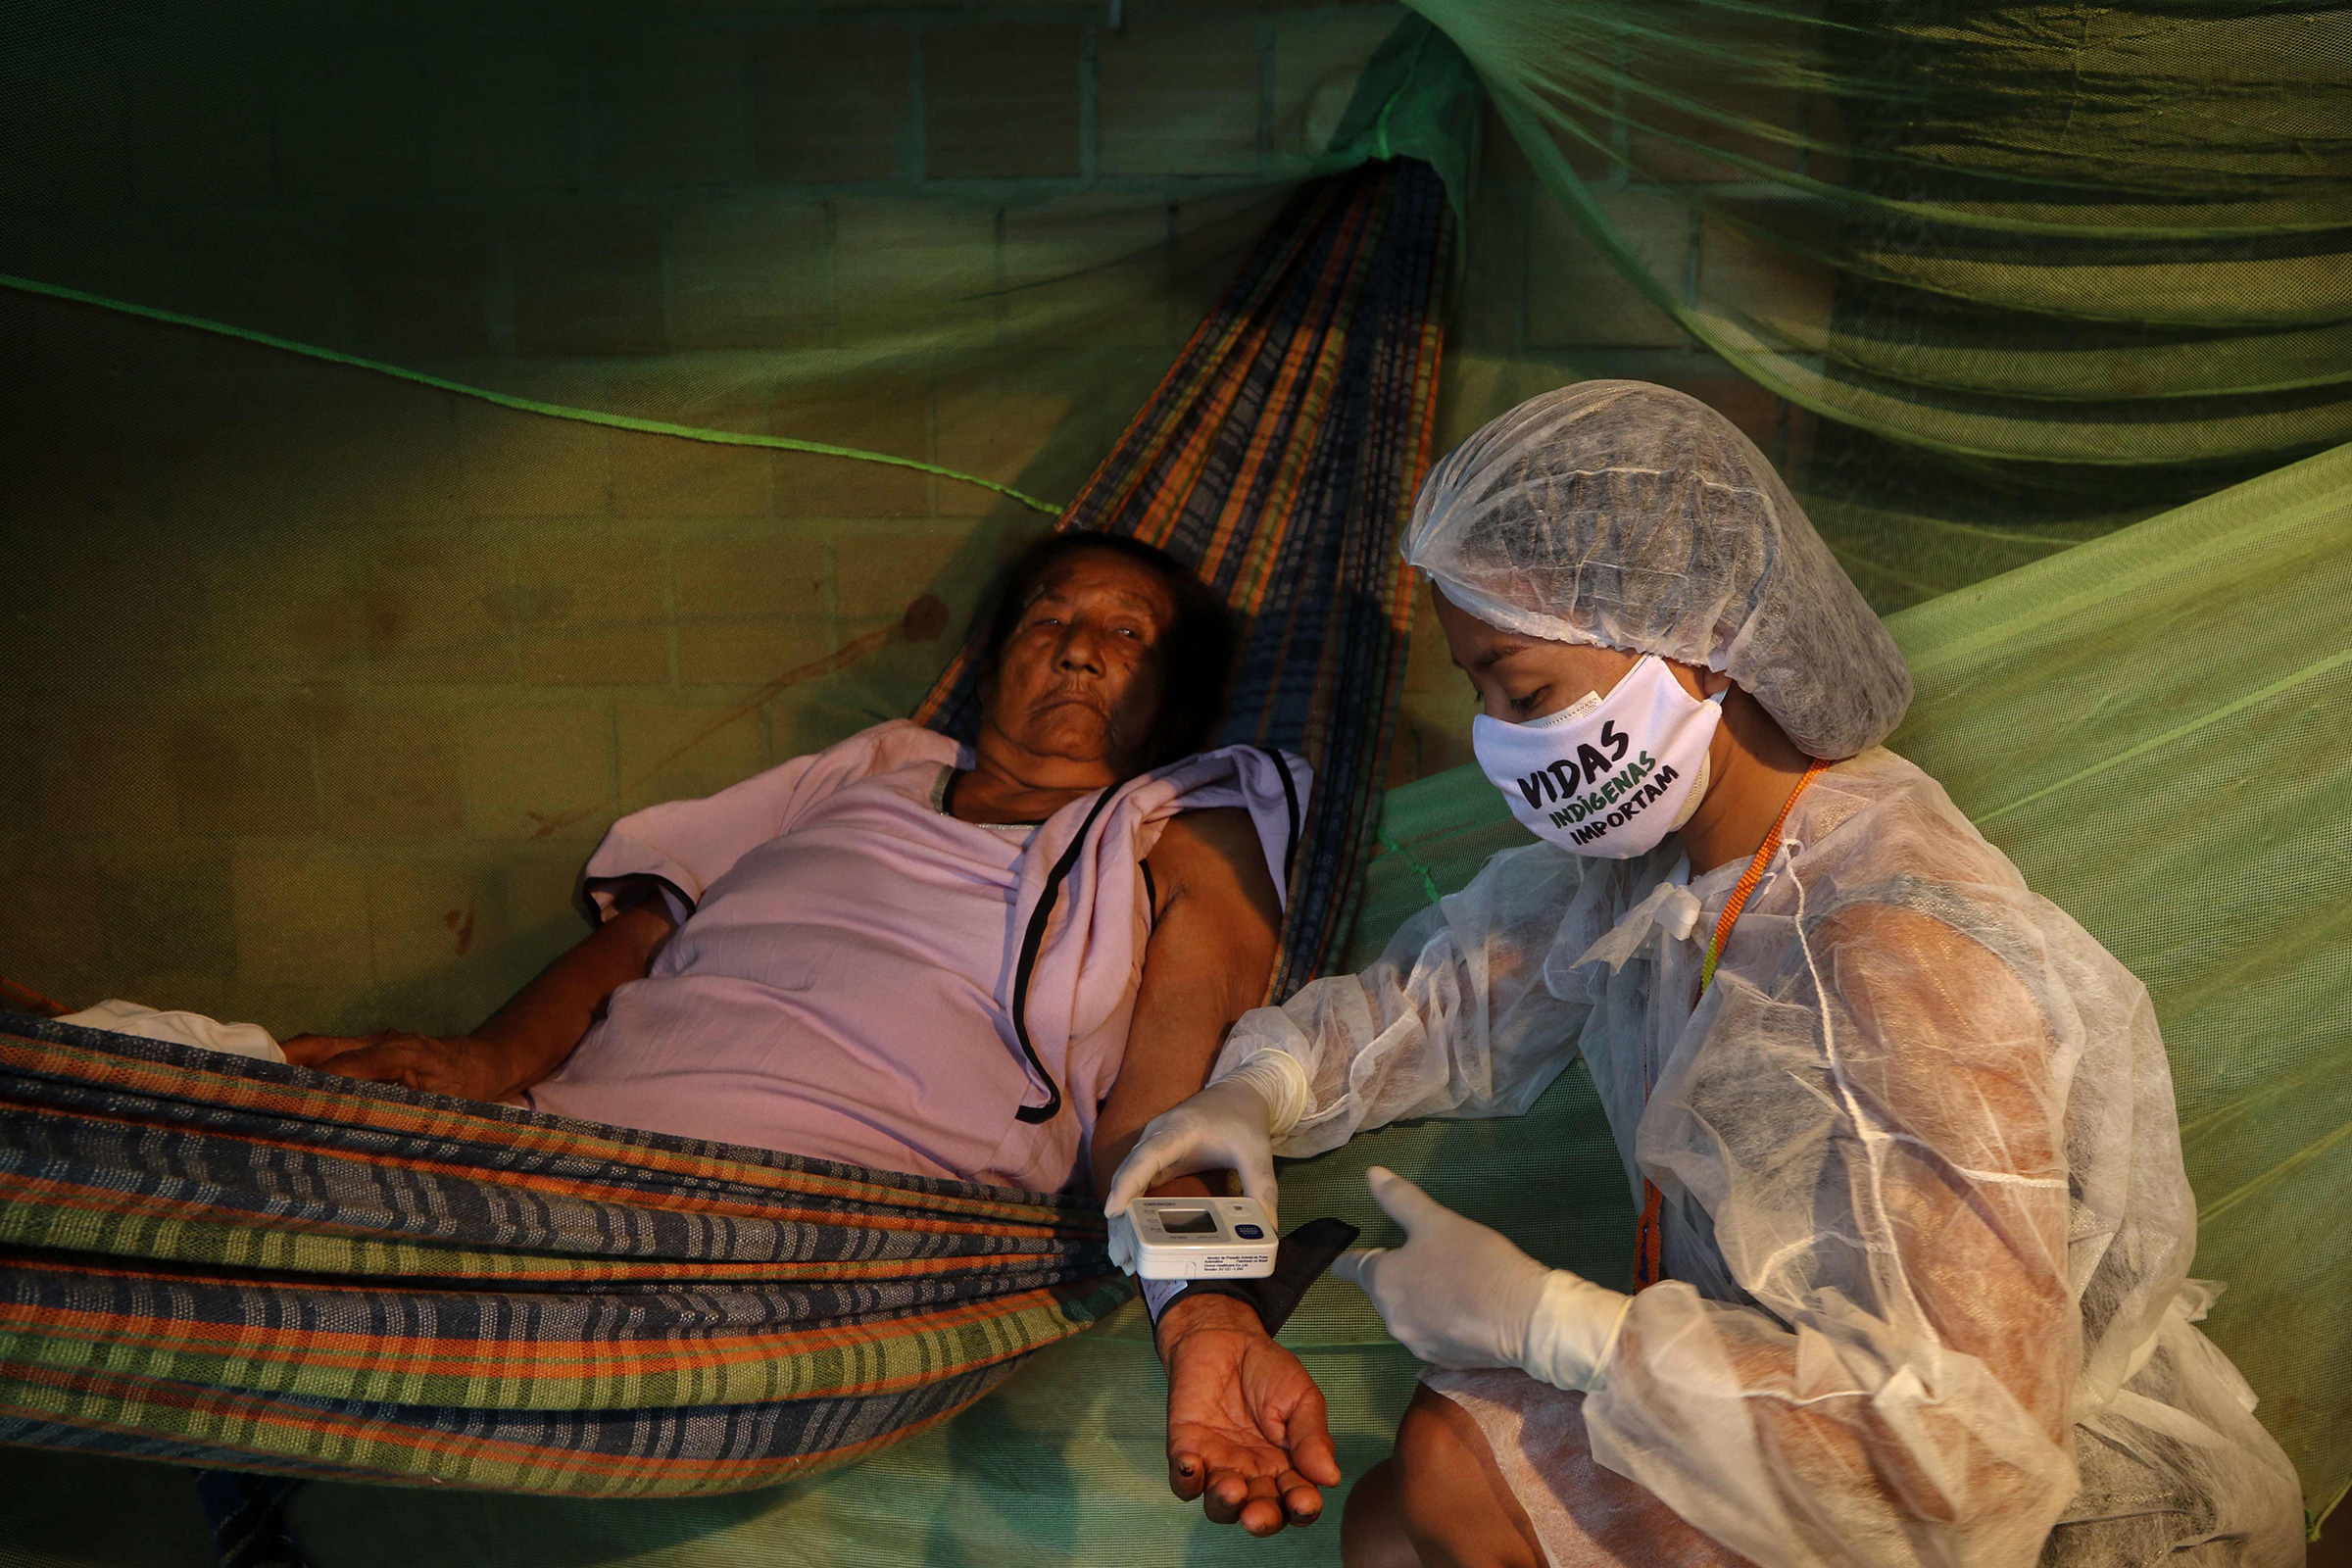 Nurse technician Vanda Ortega Witoto, 32, takes care of a patient in Parque das Tribos, an indigenous community near Manaus, the capital of Brazil’s northern Amazonas state (Ricardo Oliveira—AFP/Getty Images)